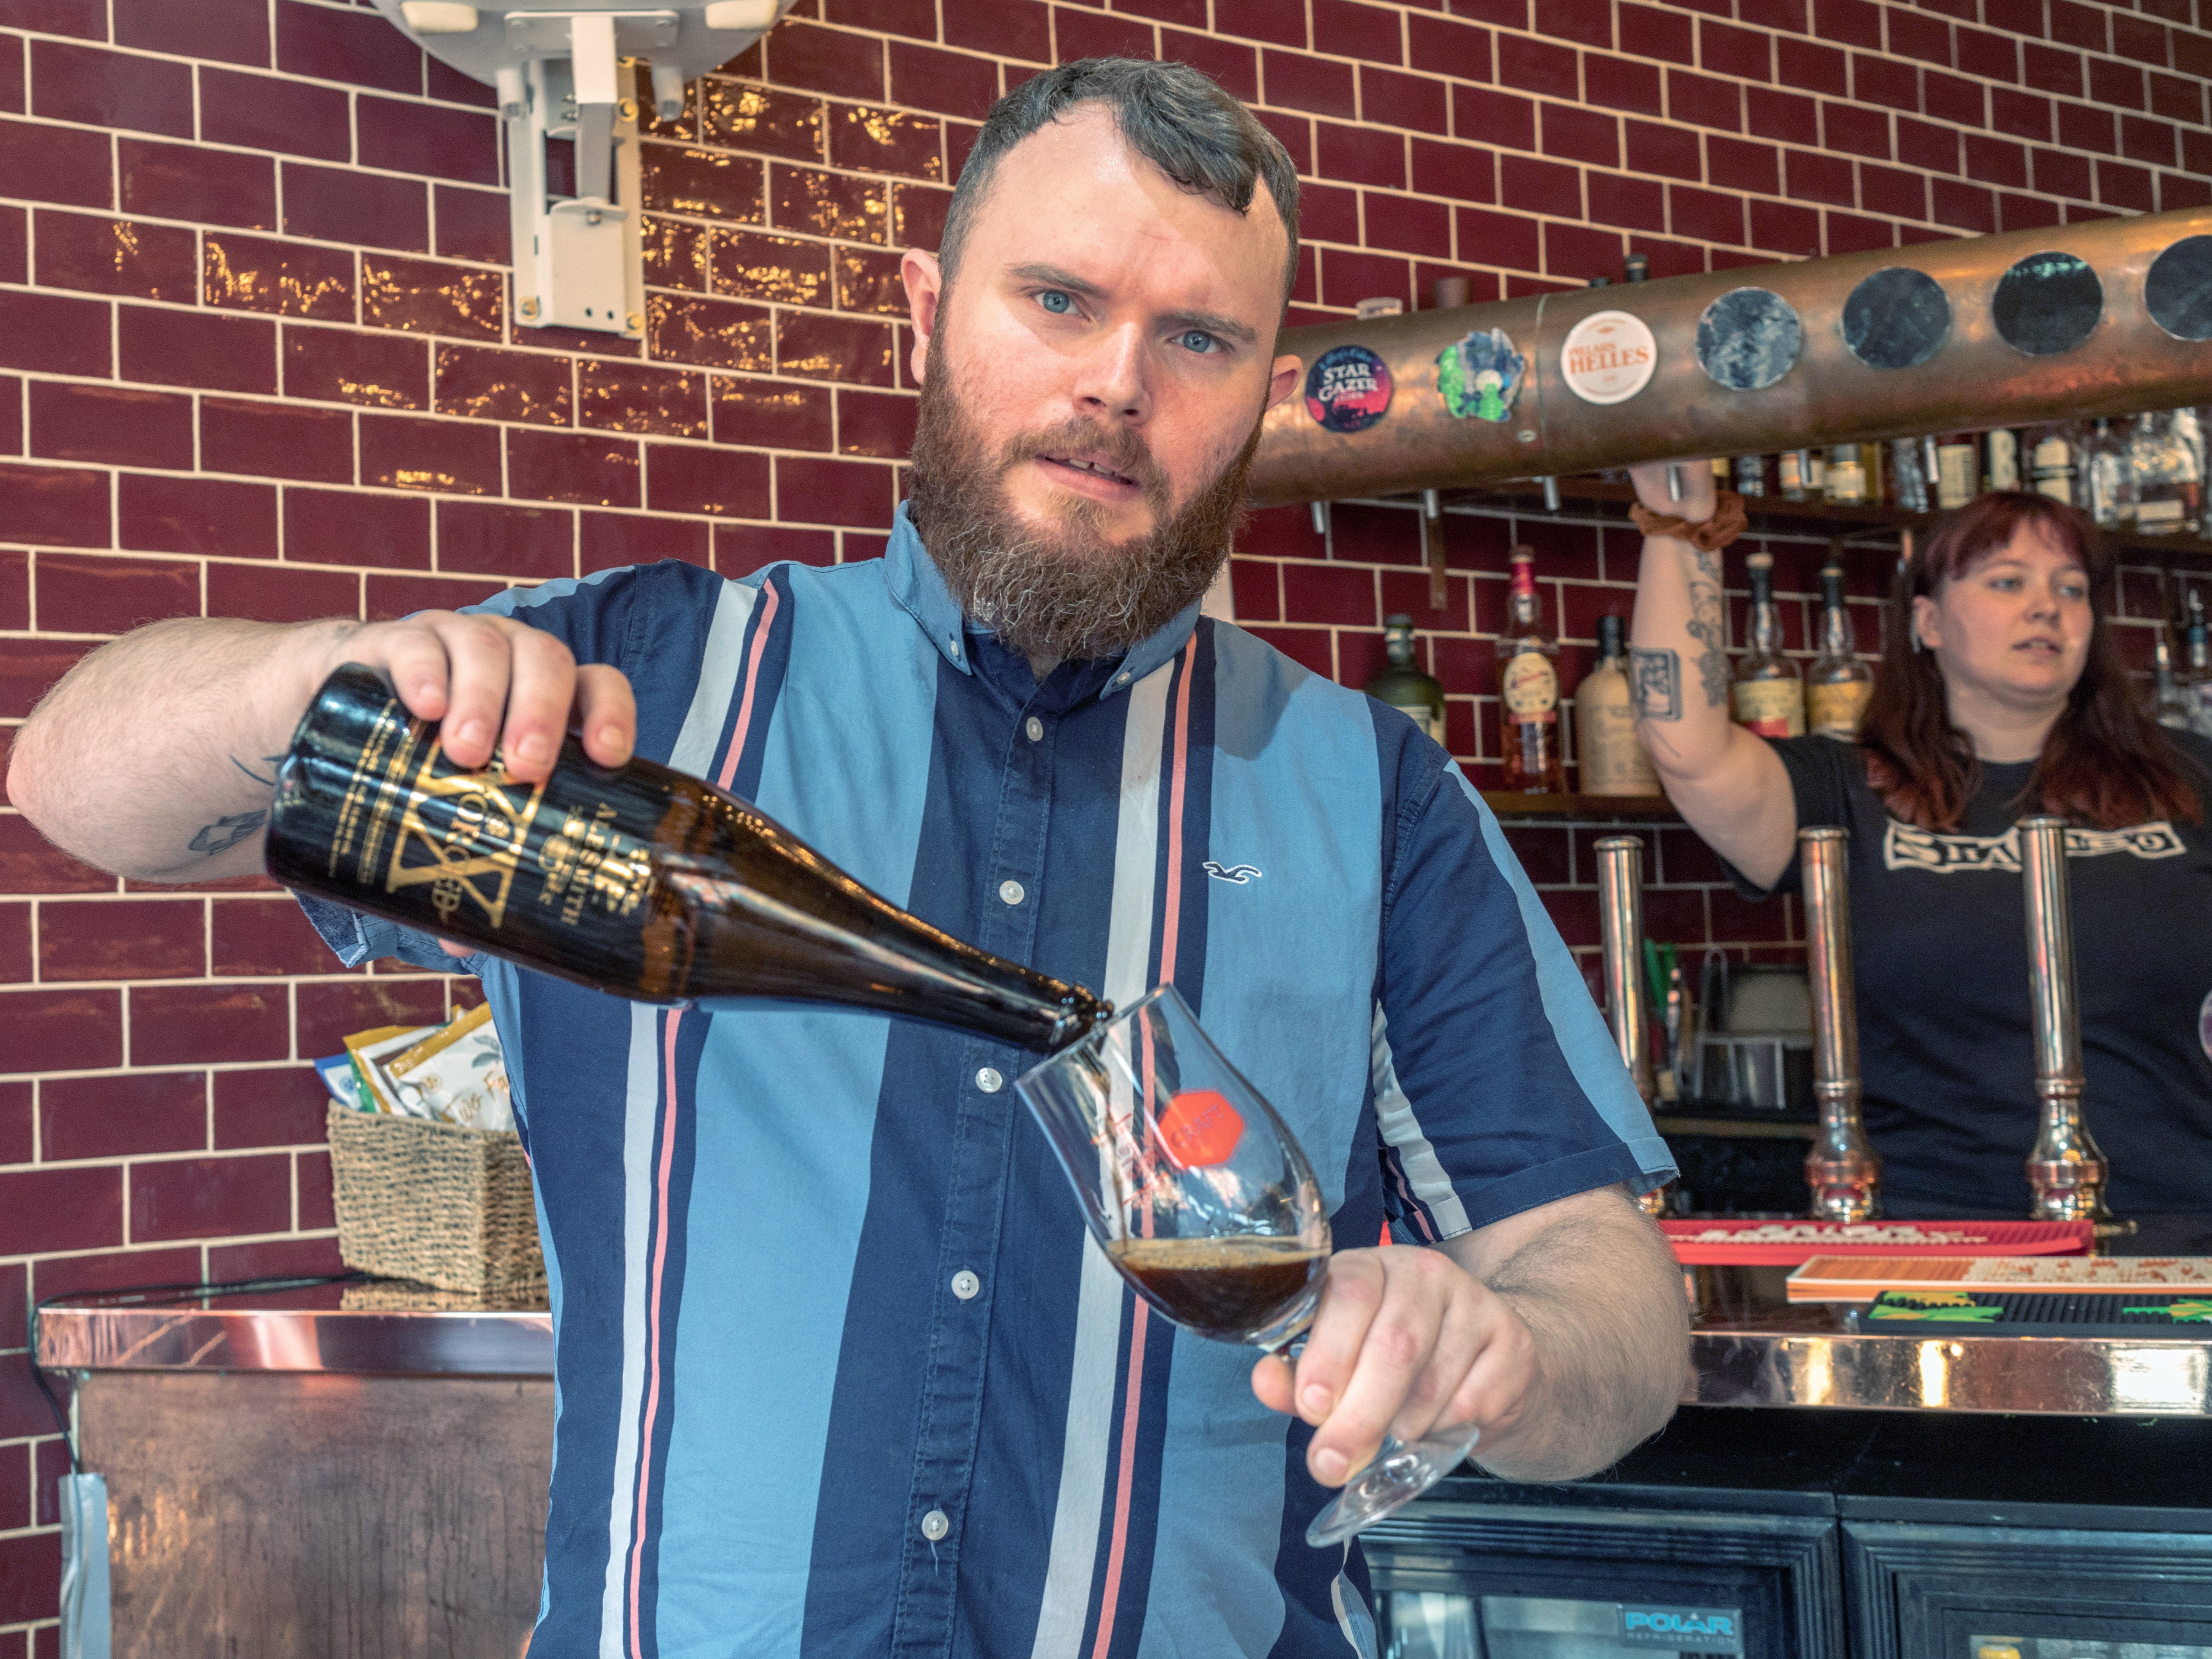 Reforged, by Alesmith, is purportedly the most expensive beer in London